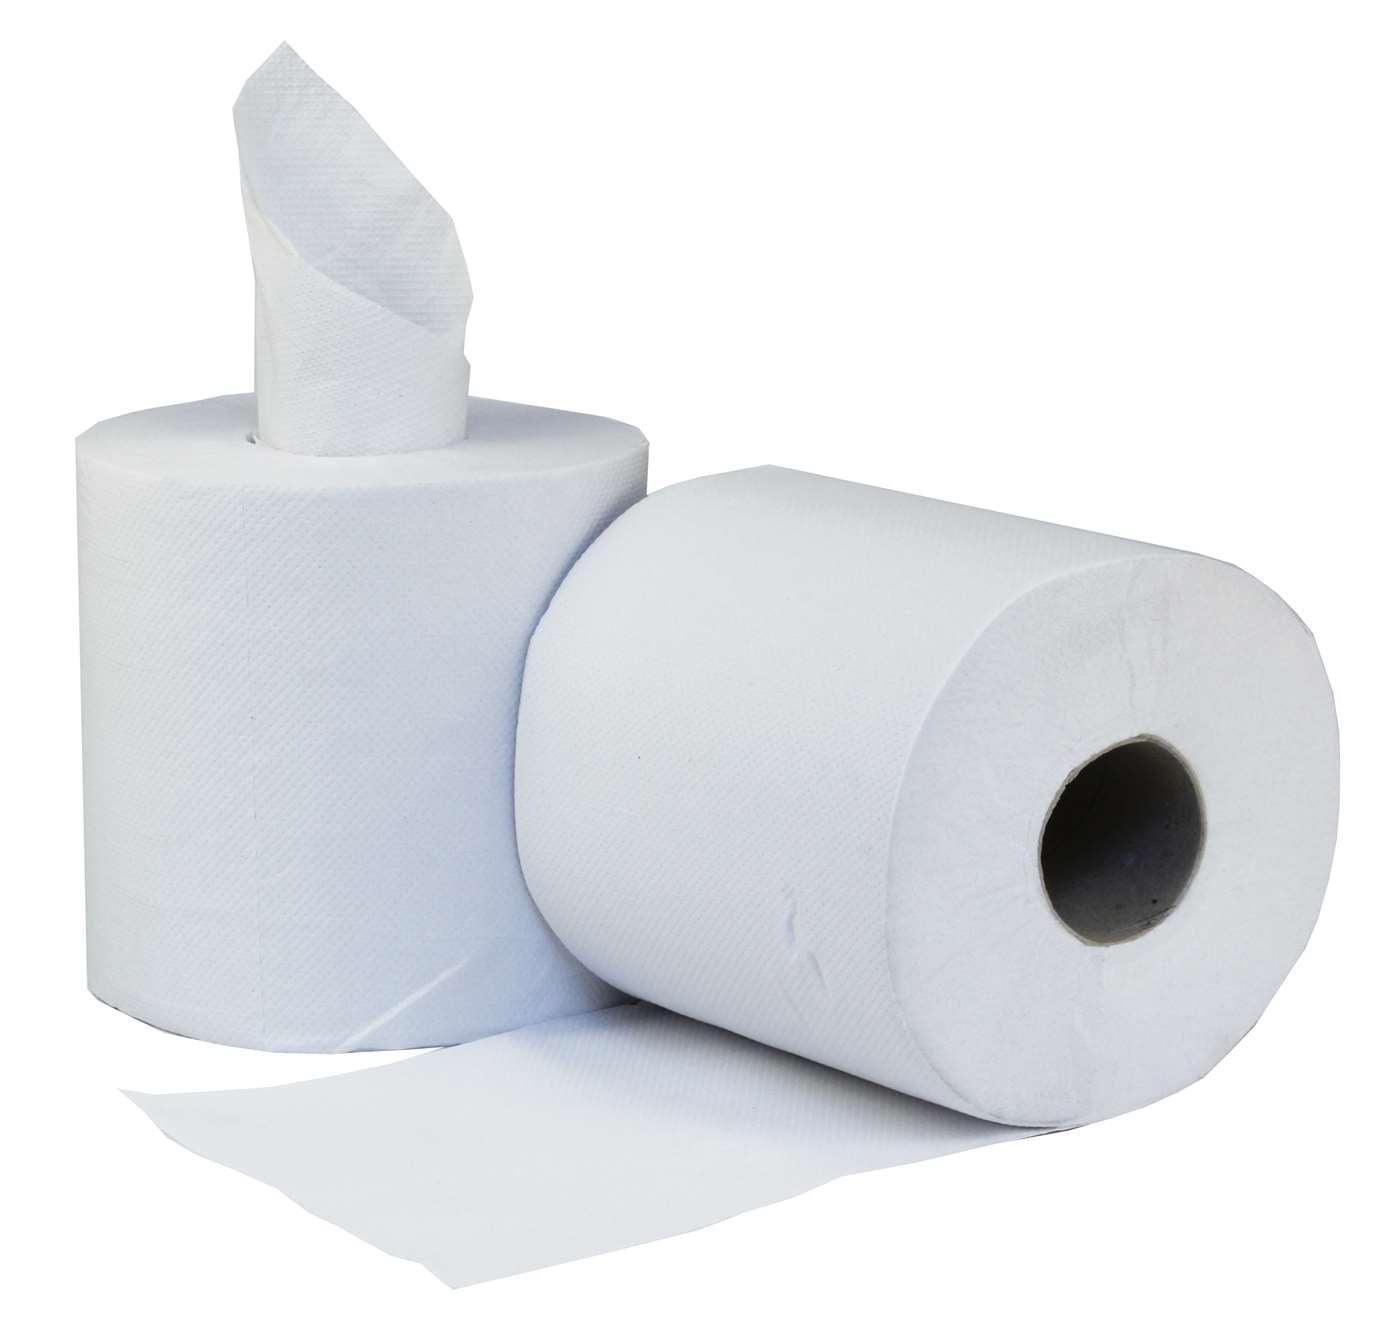 Centrefeed Rolls 2ply White - 16.6cm x 120m (Pack of 6 Recycled Rolls) - Vending Superstore